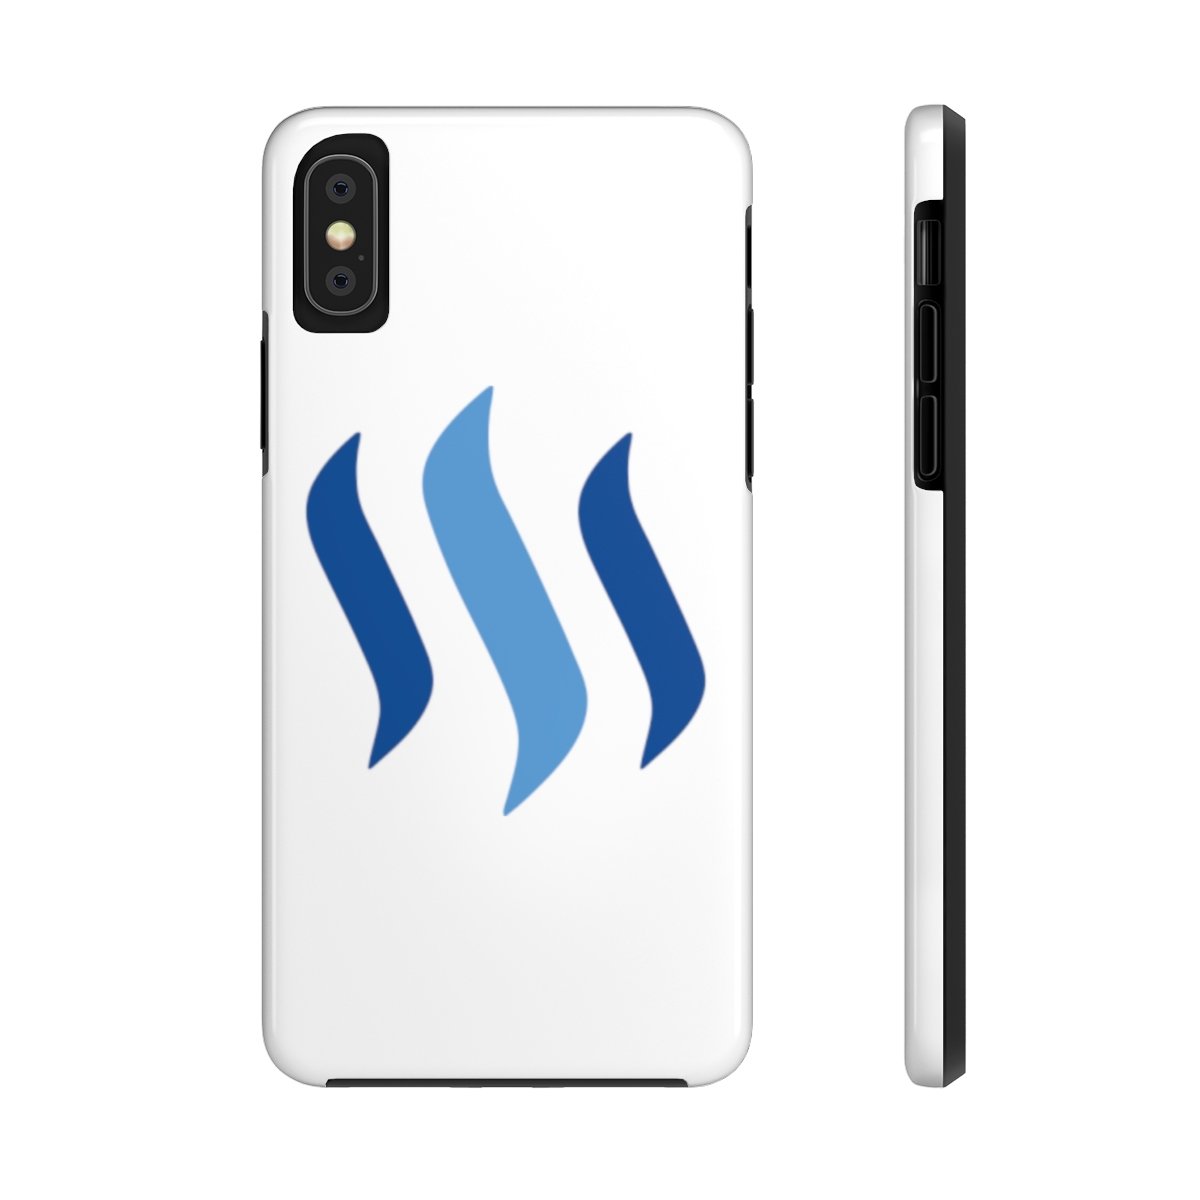 Steem - Phone Cases TCP1607 iPhone XS Official Crypto  Merch